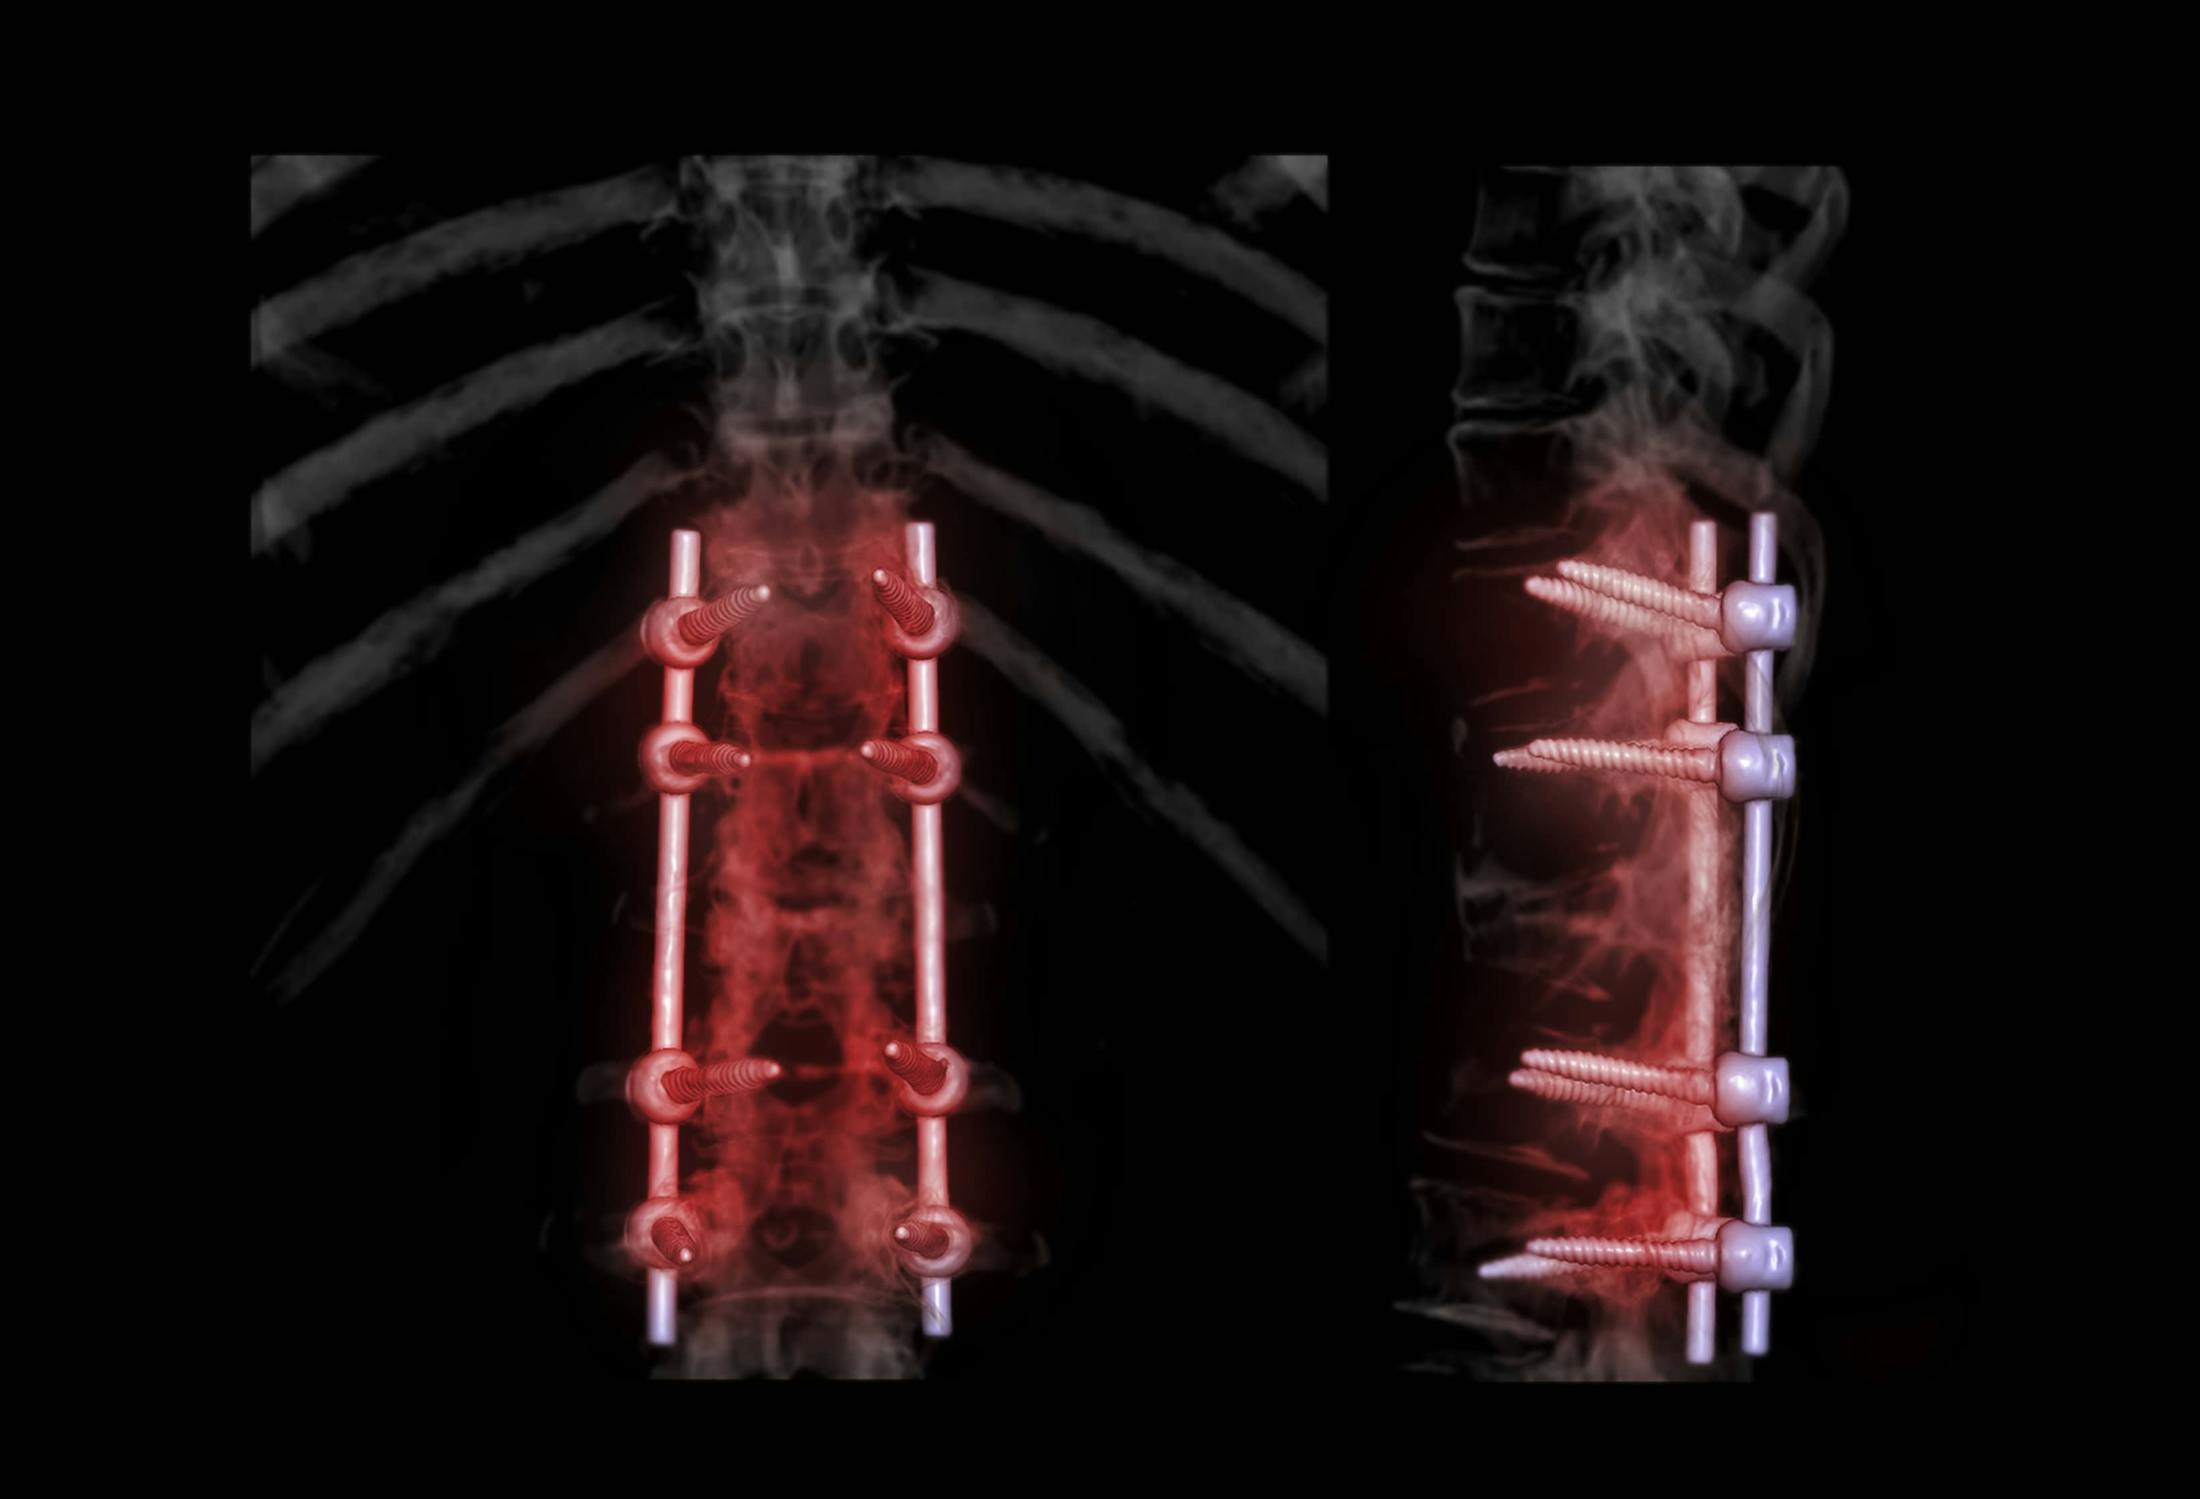 Spine after lumber interbody fusion